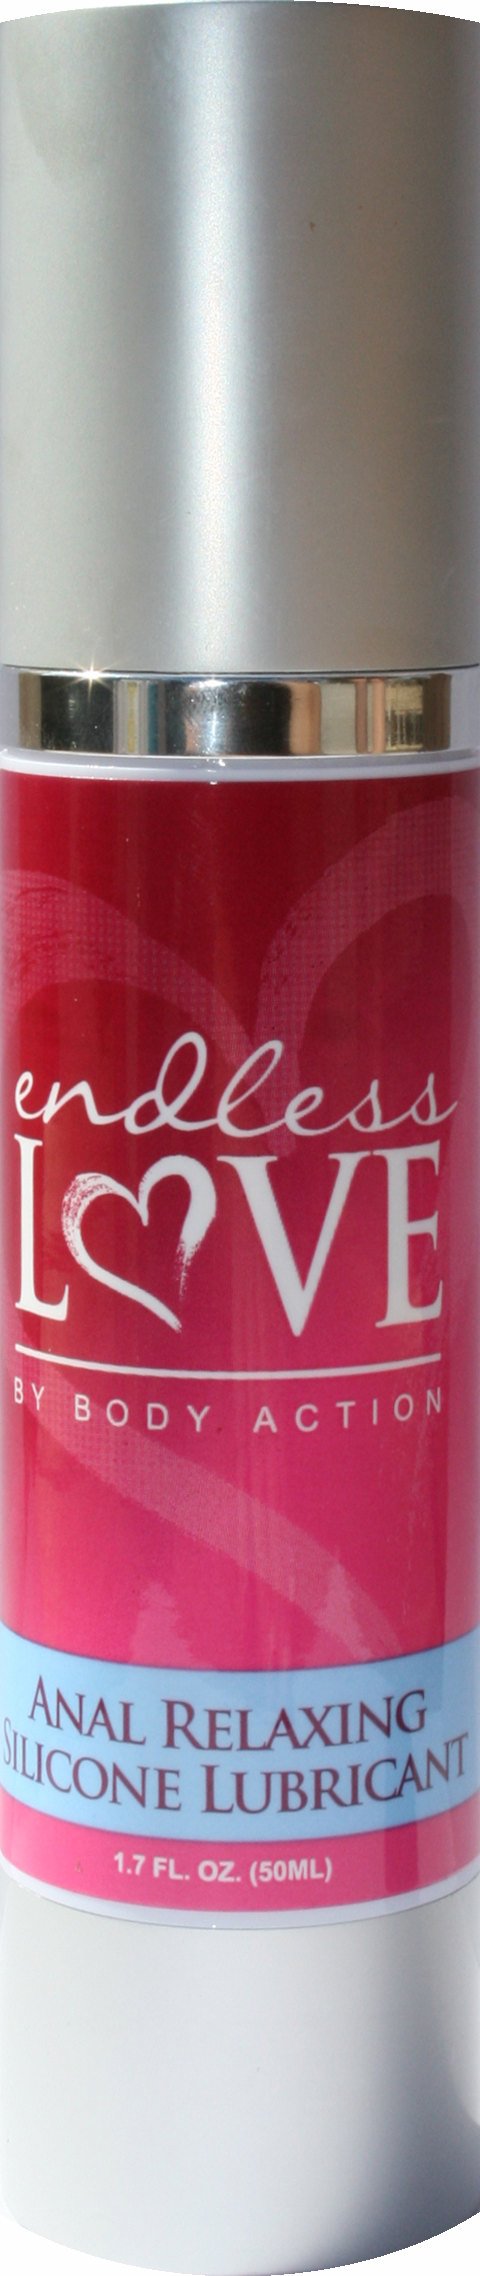 Endless Love Anal Relaxing Silicone Lube 1.7 Oz.